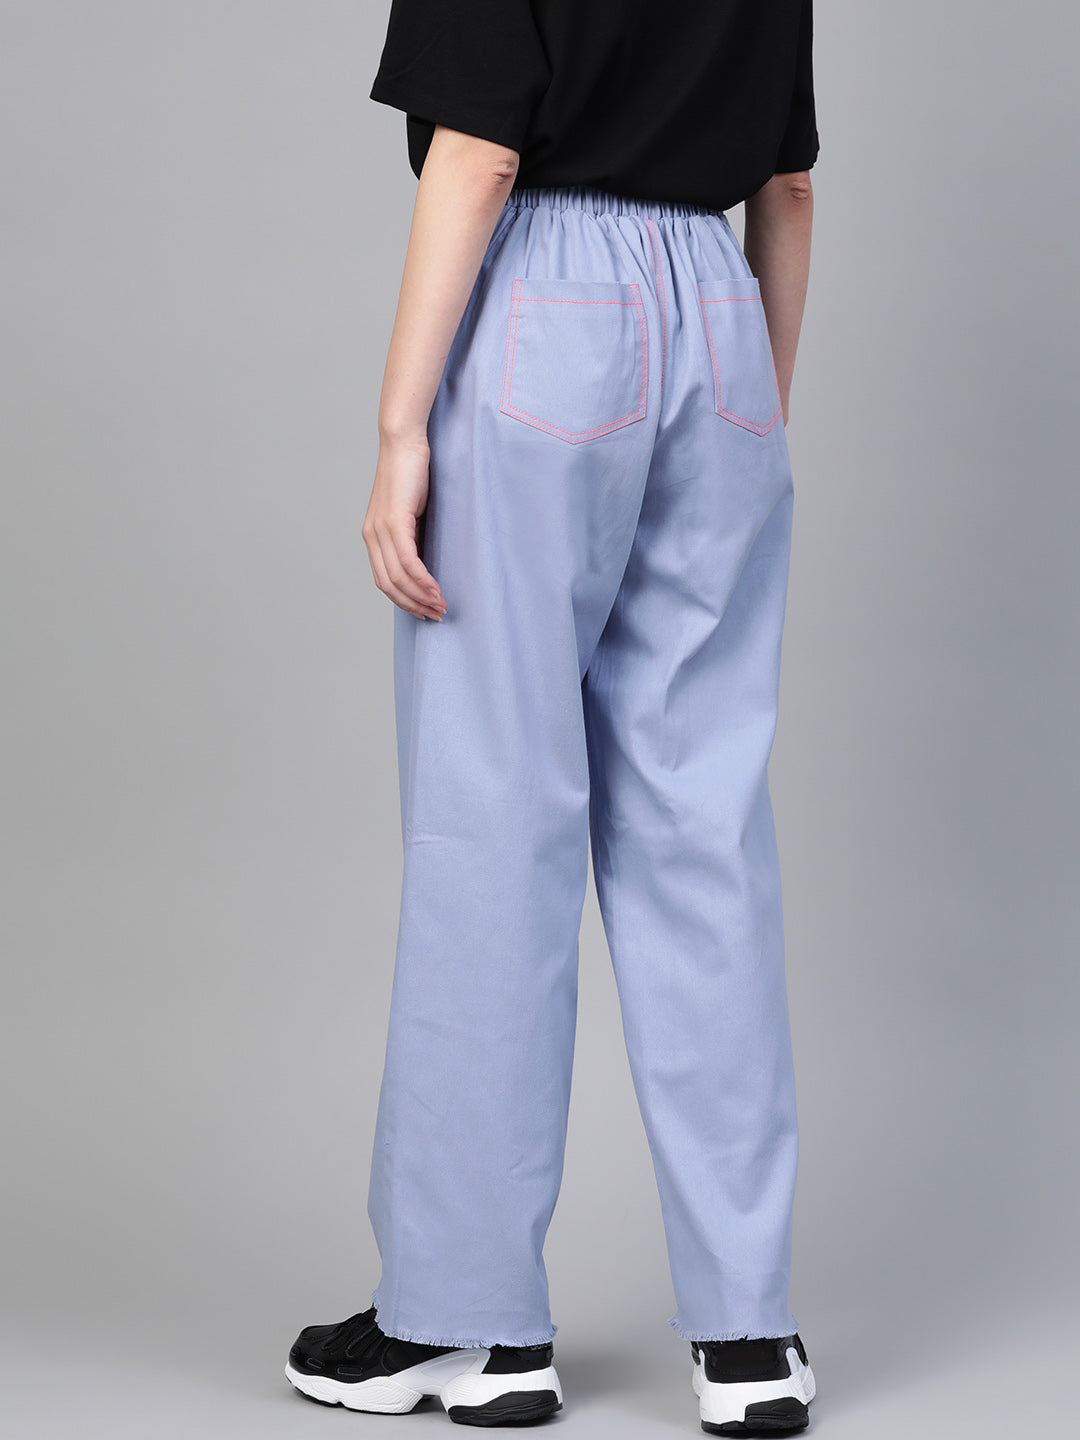 Blue With Neon Pink Contrast Stitch Wide Jeans